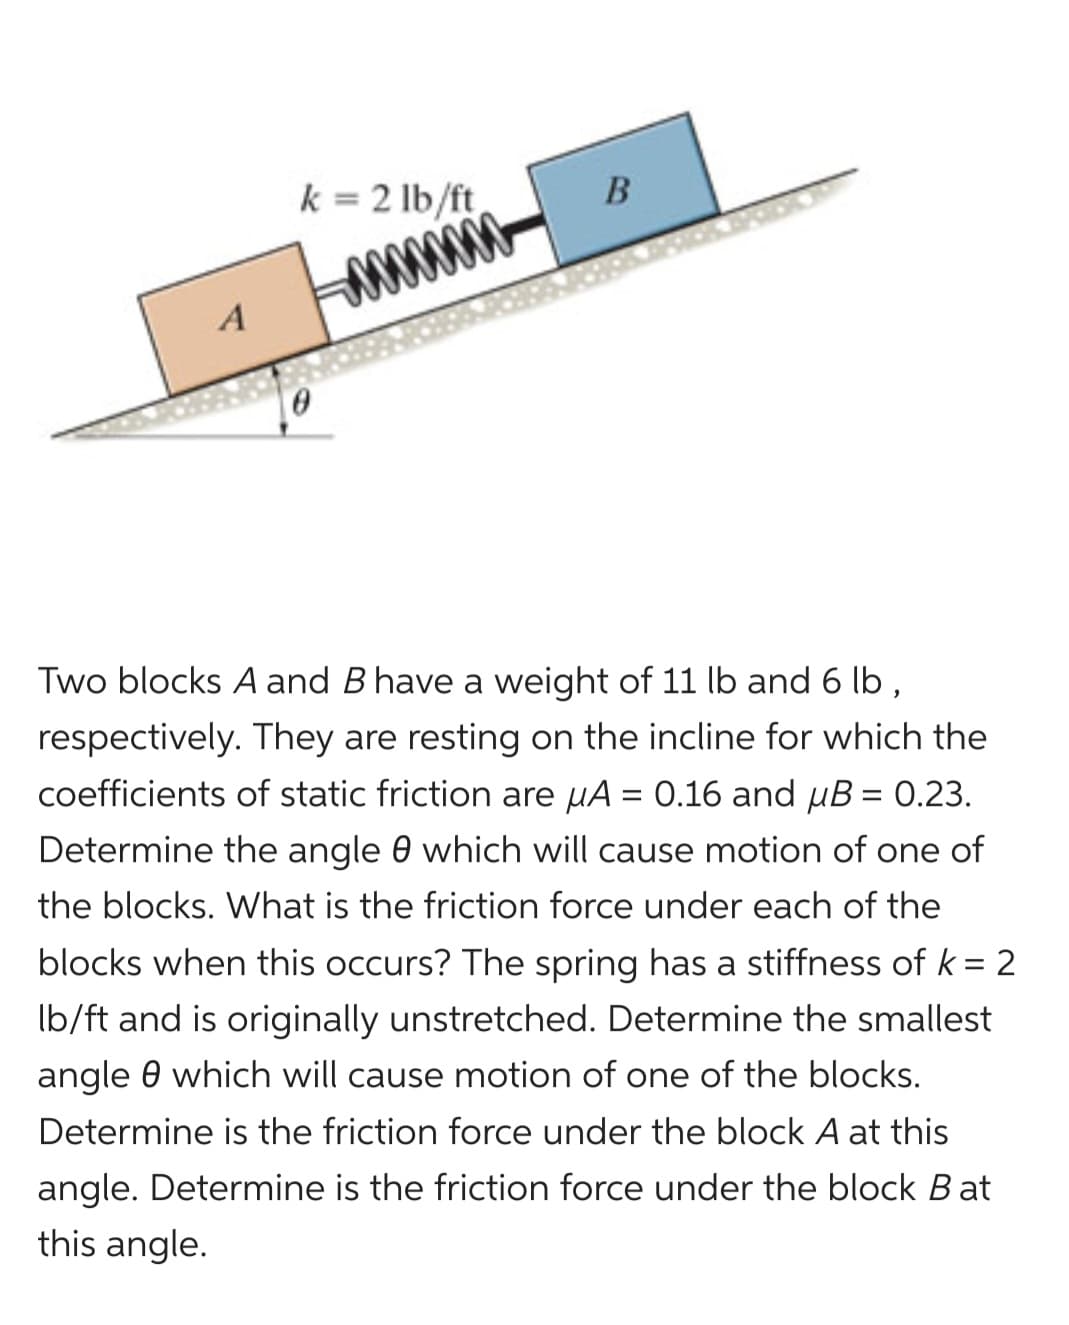 k = 2 lb/ft
0
B
Two blocks A and B have a weight of 11 lb and 6 lb,
respectively. They are resting on the incline for which the
coefficients of static friction are μA = 0.16 and µB = 0.23.
Determine the angle 0 which will cause motion of one of
the blocks. What is the friction force under each of the
blocks when this occurs? The spring has a stiffness of k = 2
lb/ft and is originally unstretched. Determine the smallest
angle which will cause motion of one of the blocks.
Determine is the friction force under the block A at this
angle. Determine is the friction force under the block Bat
this angle.